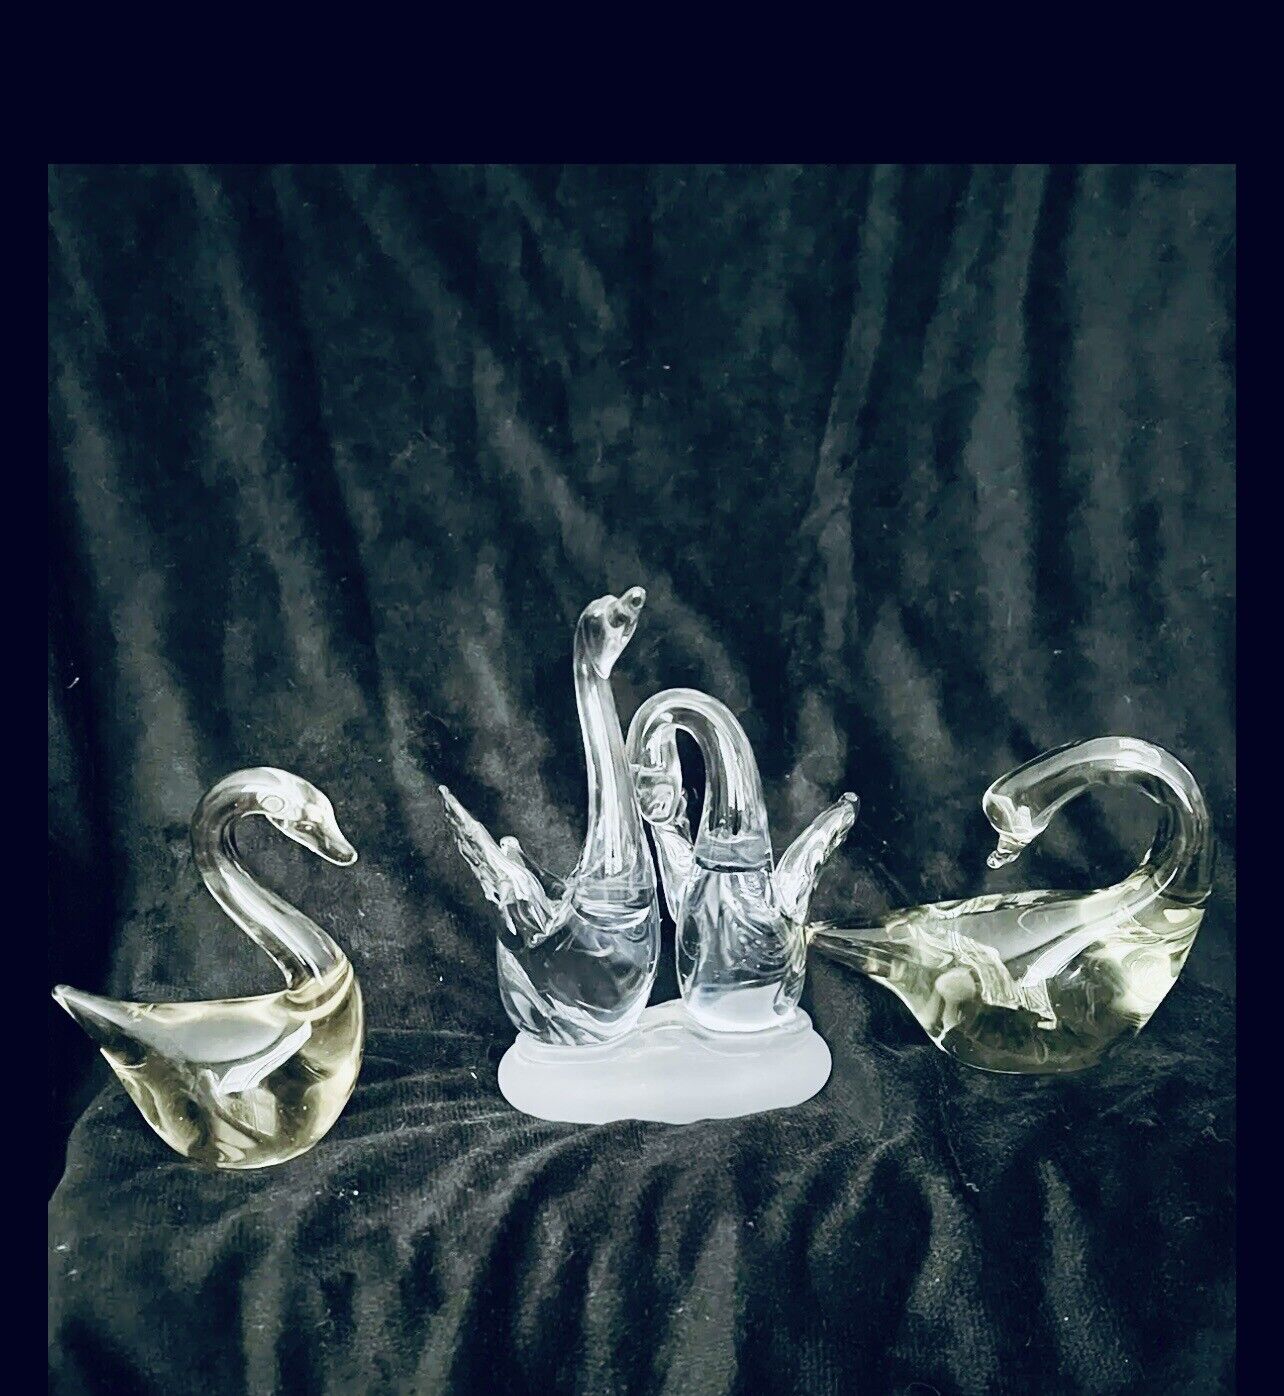 Lot of 3 Vintage Hand Made Crystal Swans Figurines Made In Taiwan